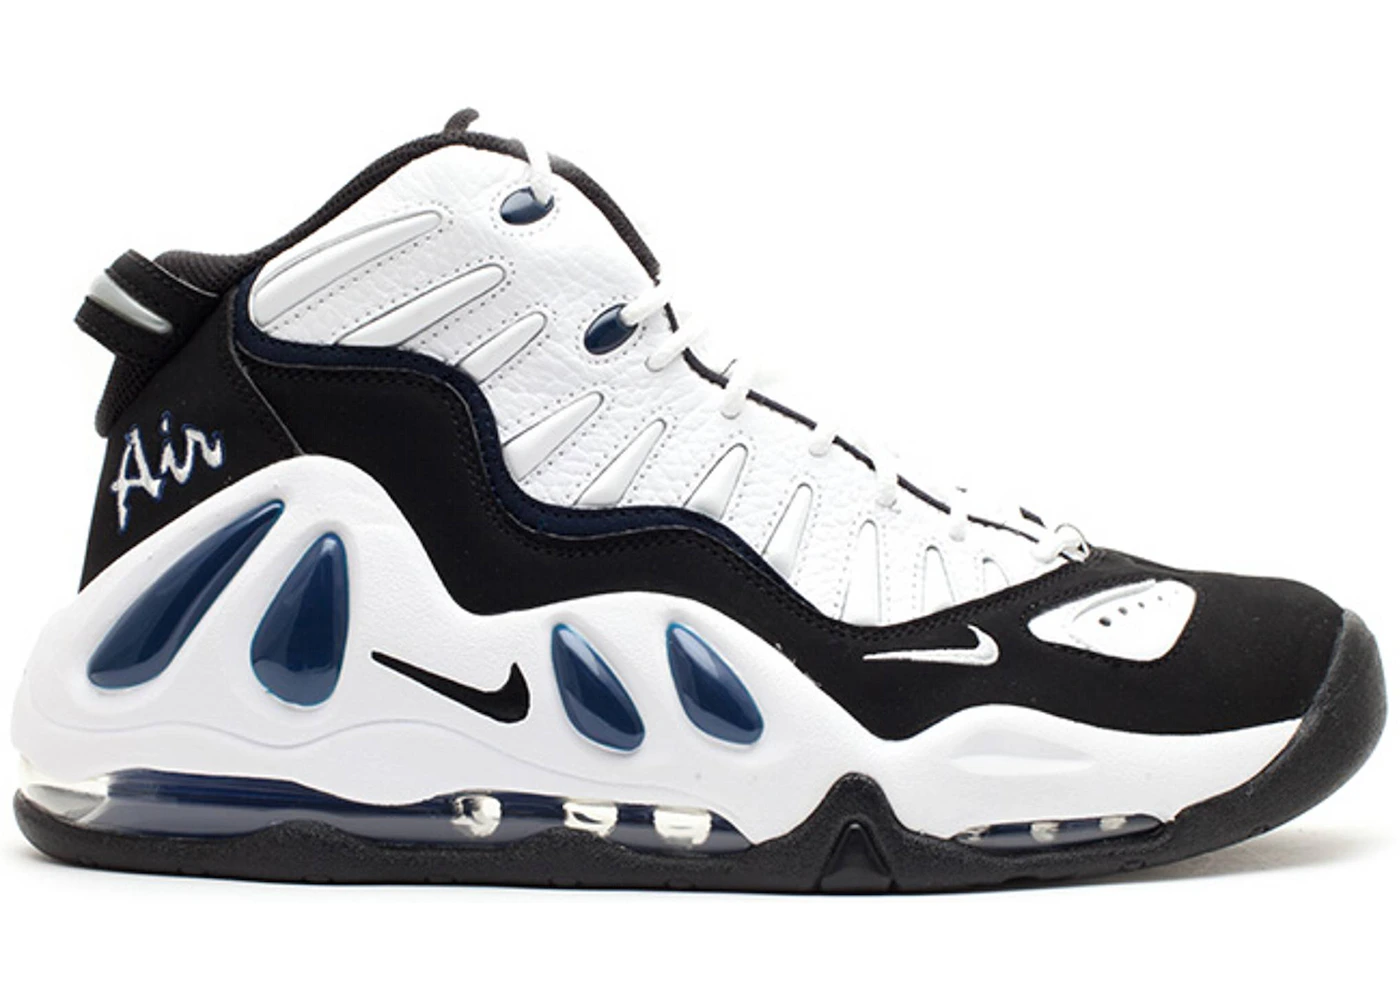 Analytical Hinge Surrey Nike Air Max Uptempo 97 White Black College Navy - 399207-100 - US